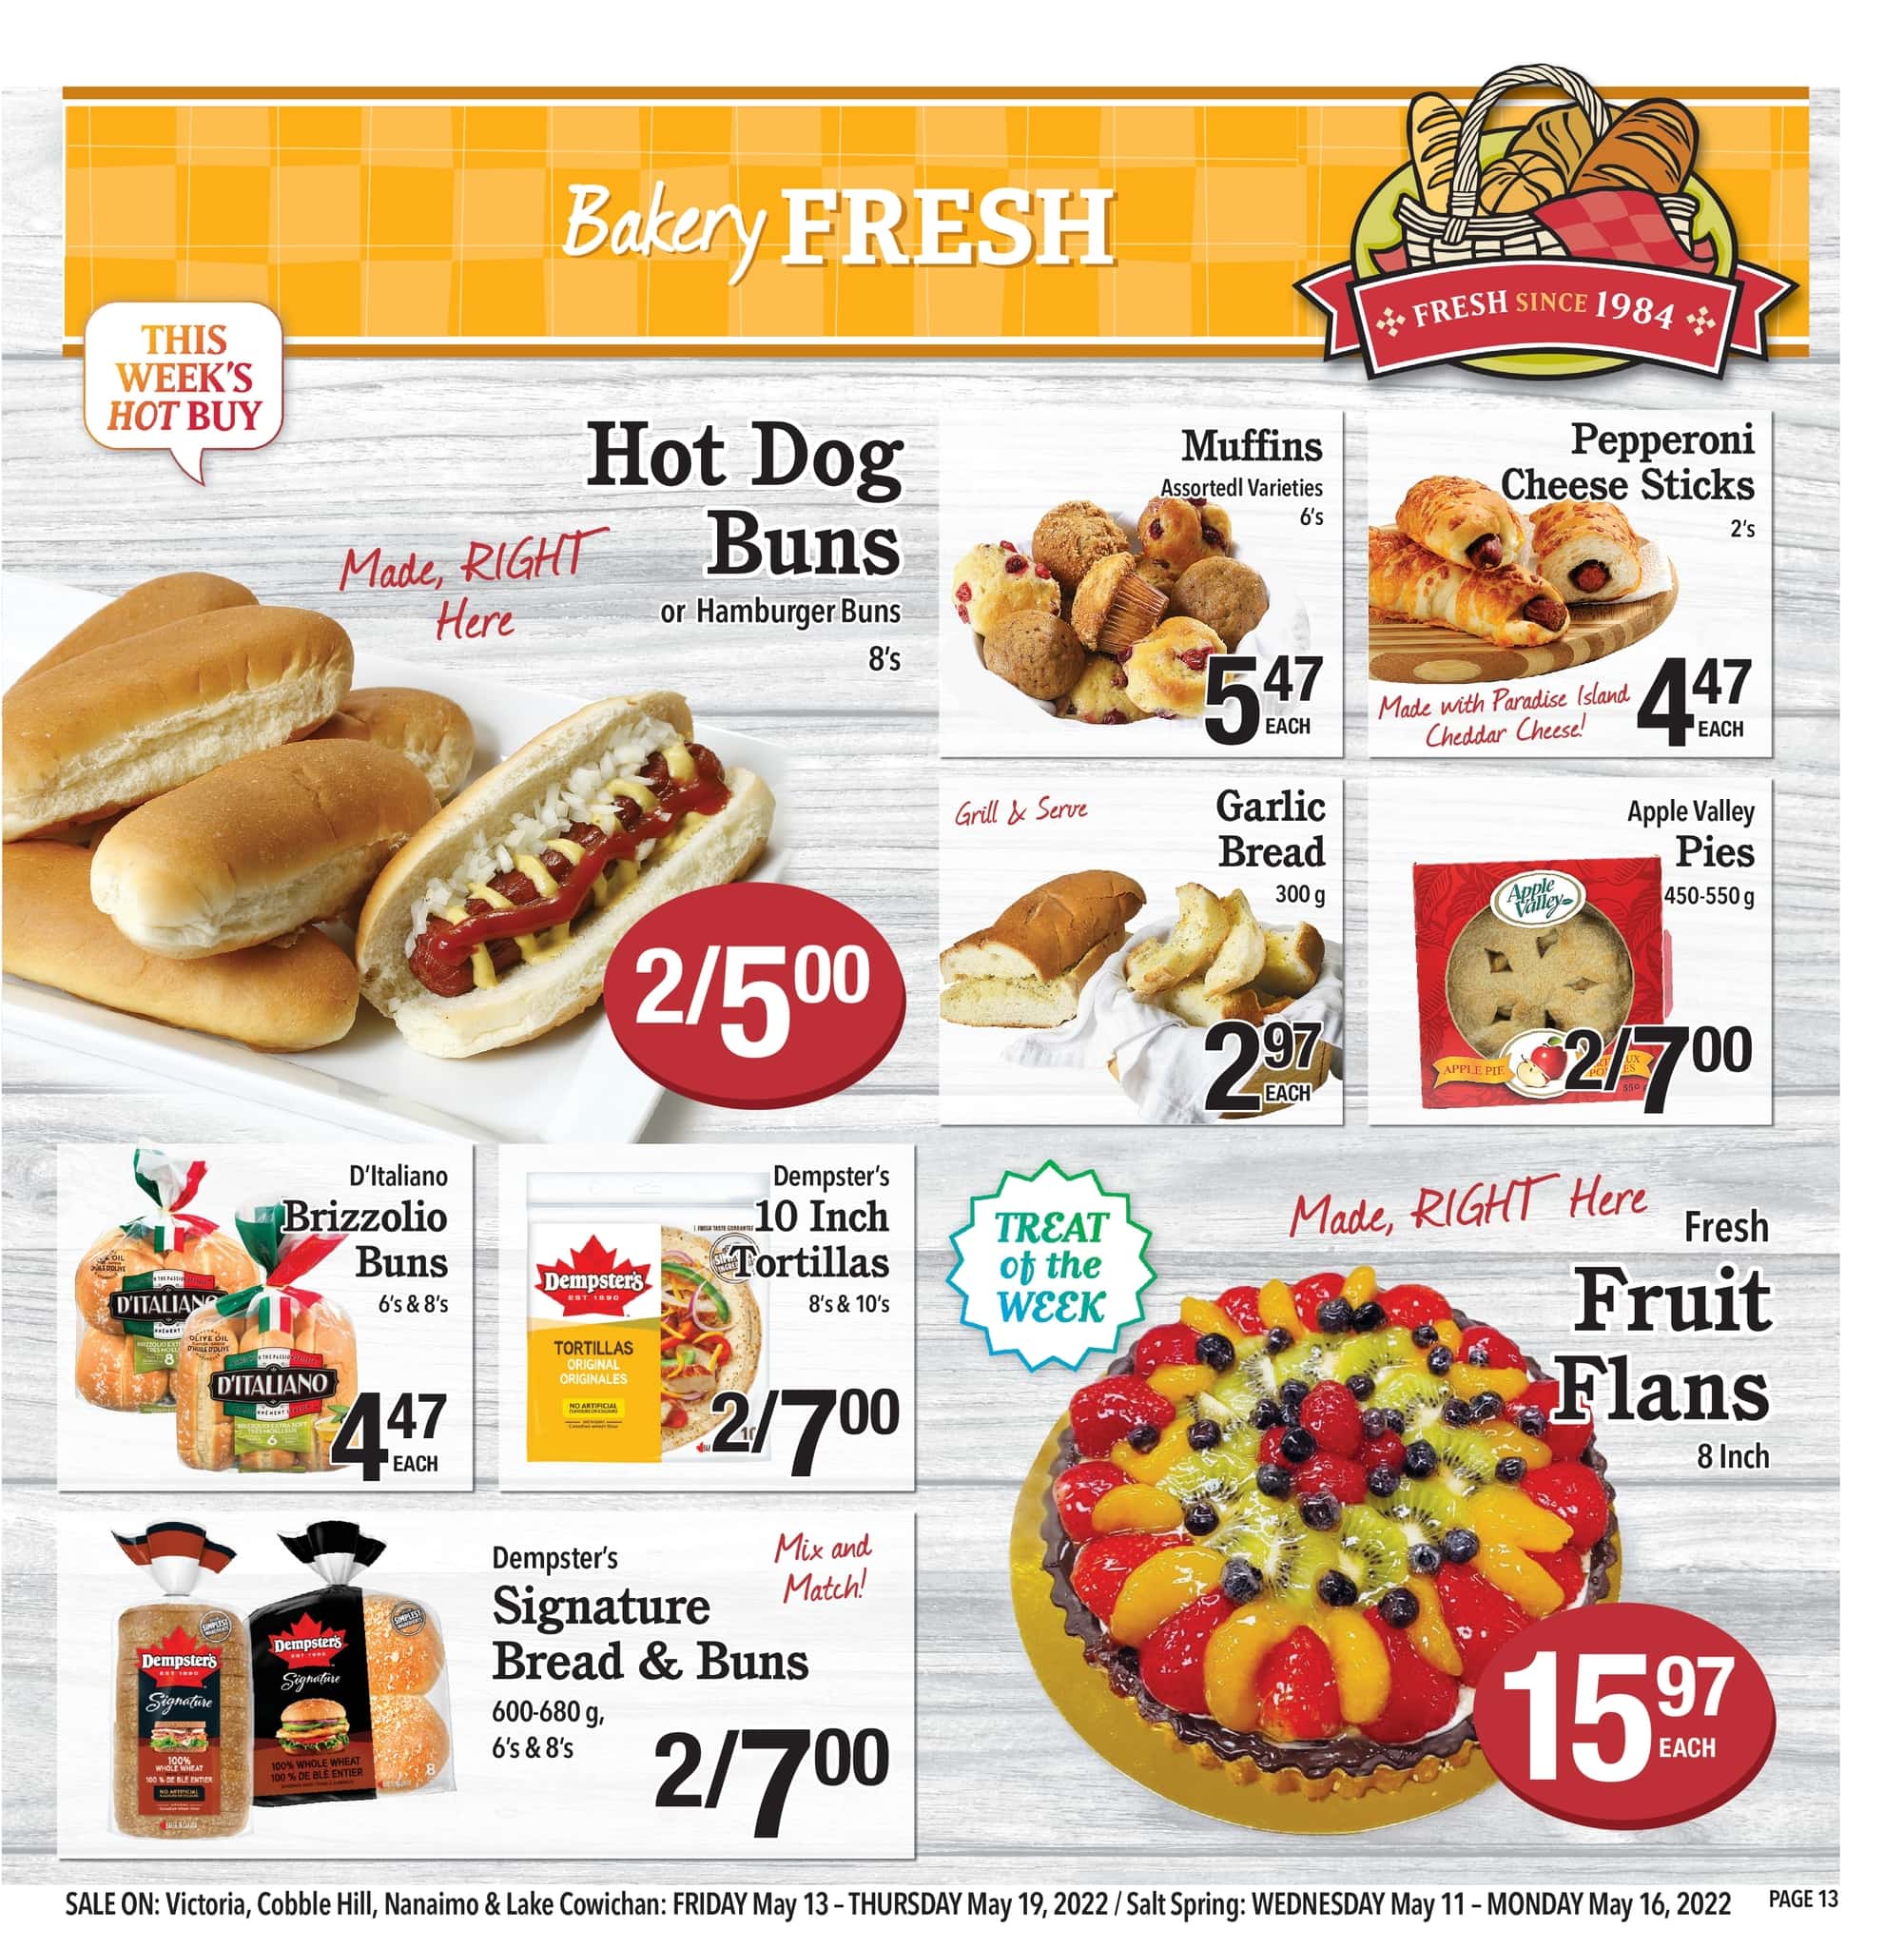 Country Grocer - Weekly Flyer Specials - Page 13